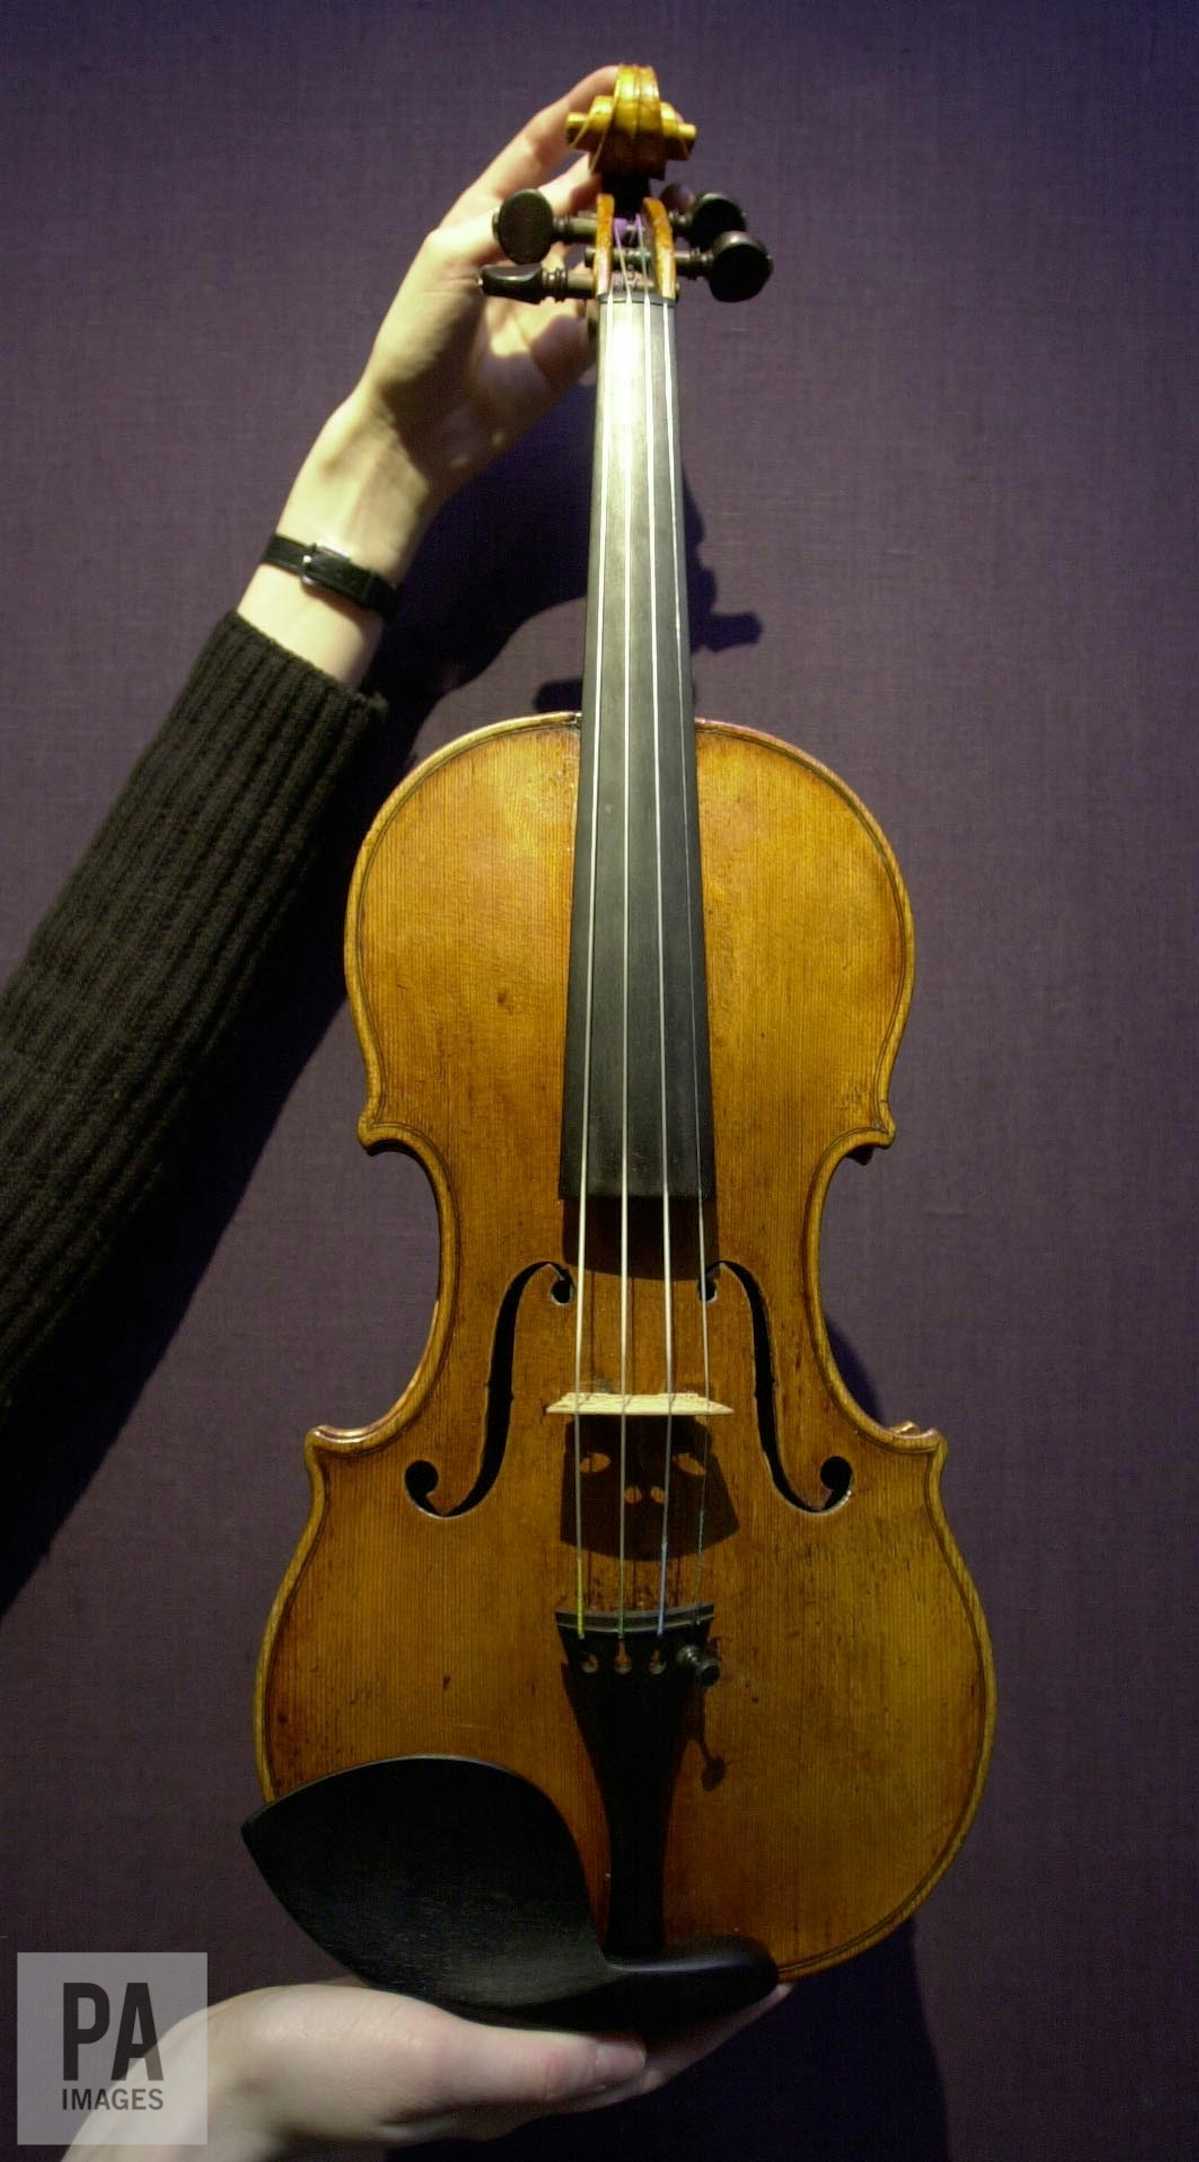 Sherlock Holmes and the case of the forged Stradivari: did we miss a